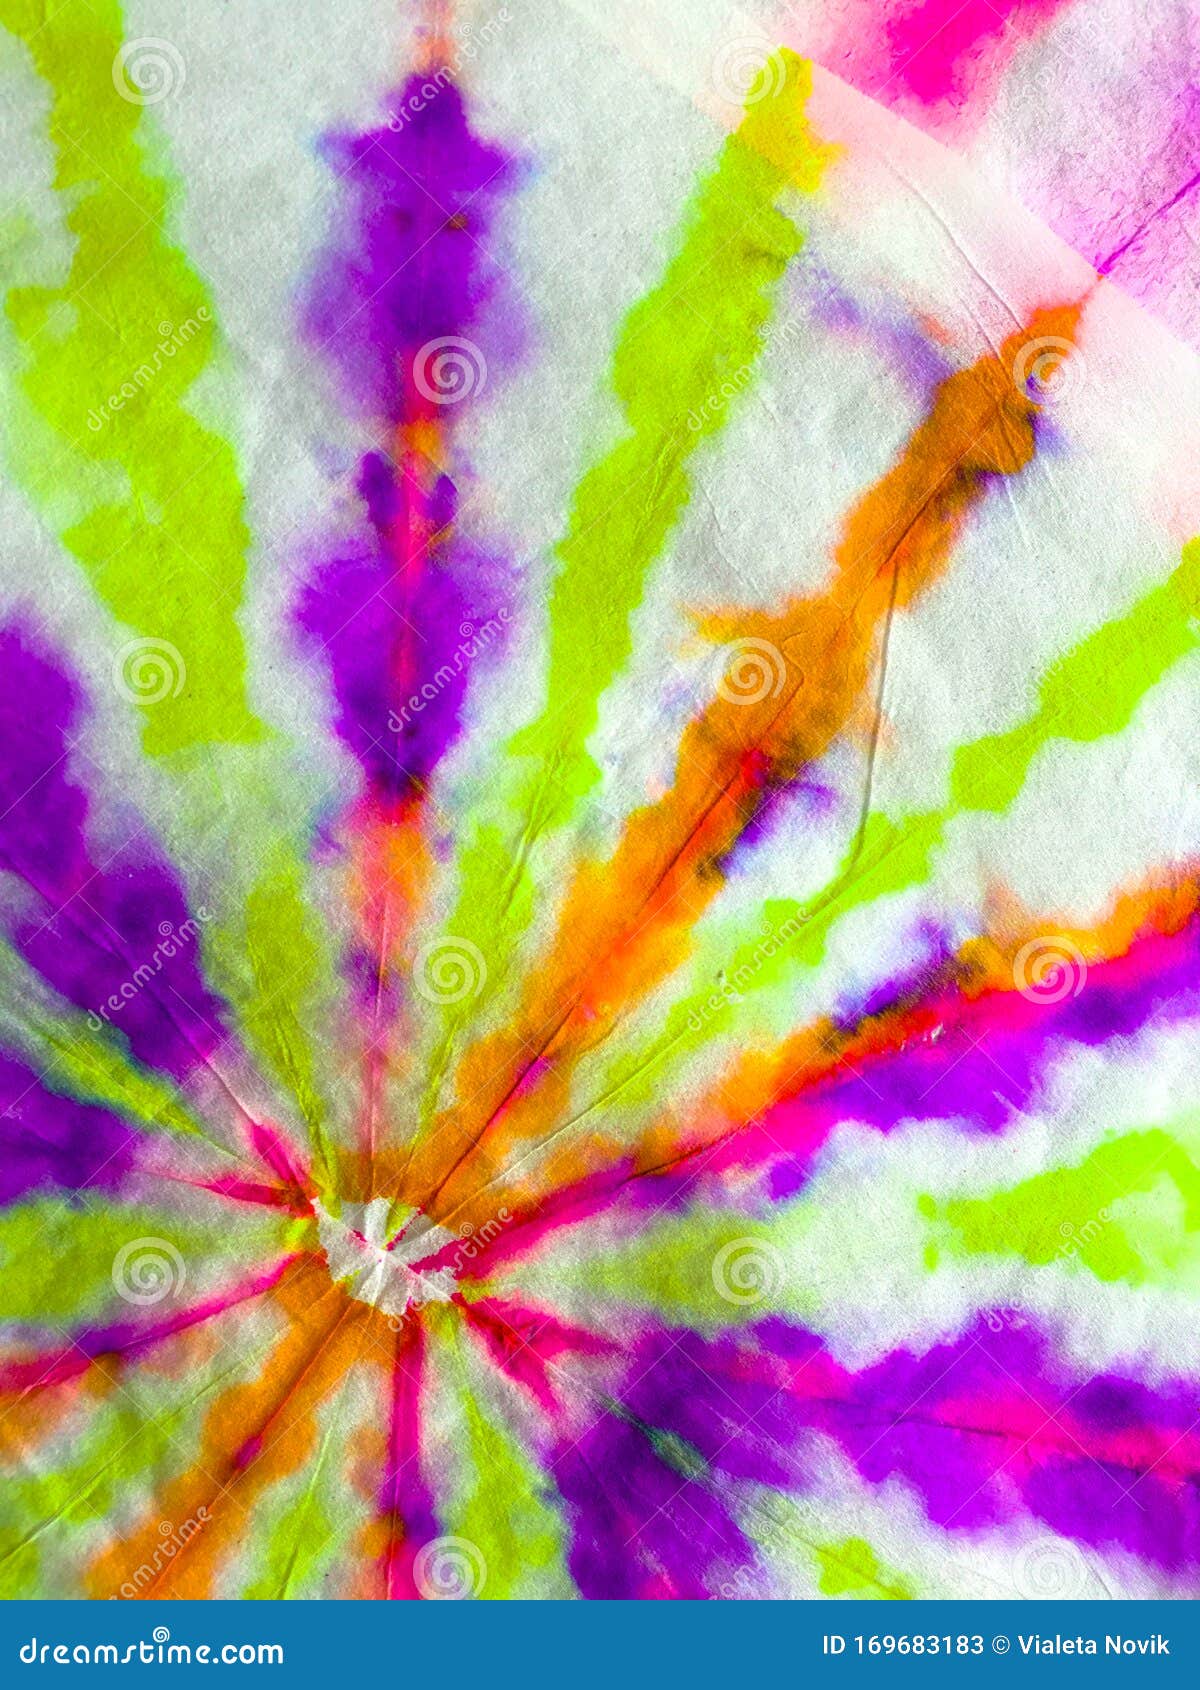 Green Tie Dye Stock Photos and Pictures - 279,706 Images